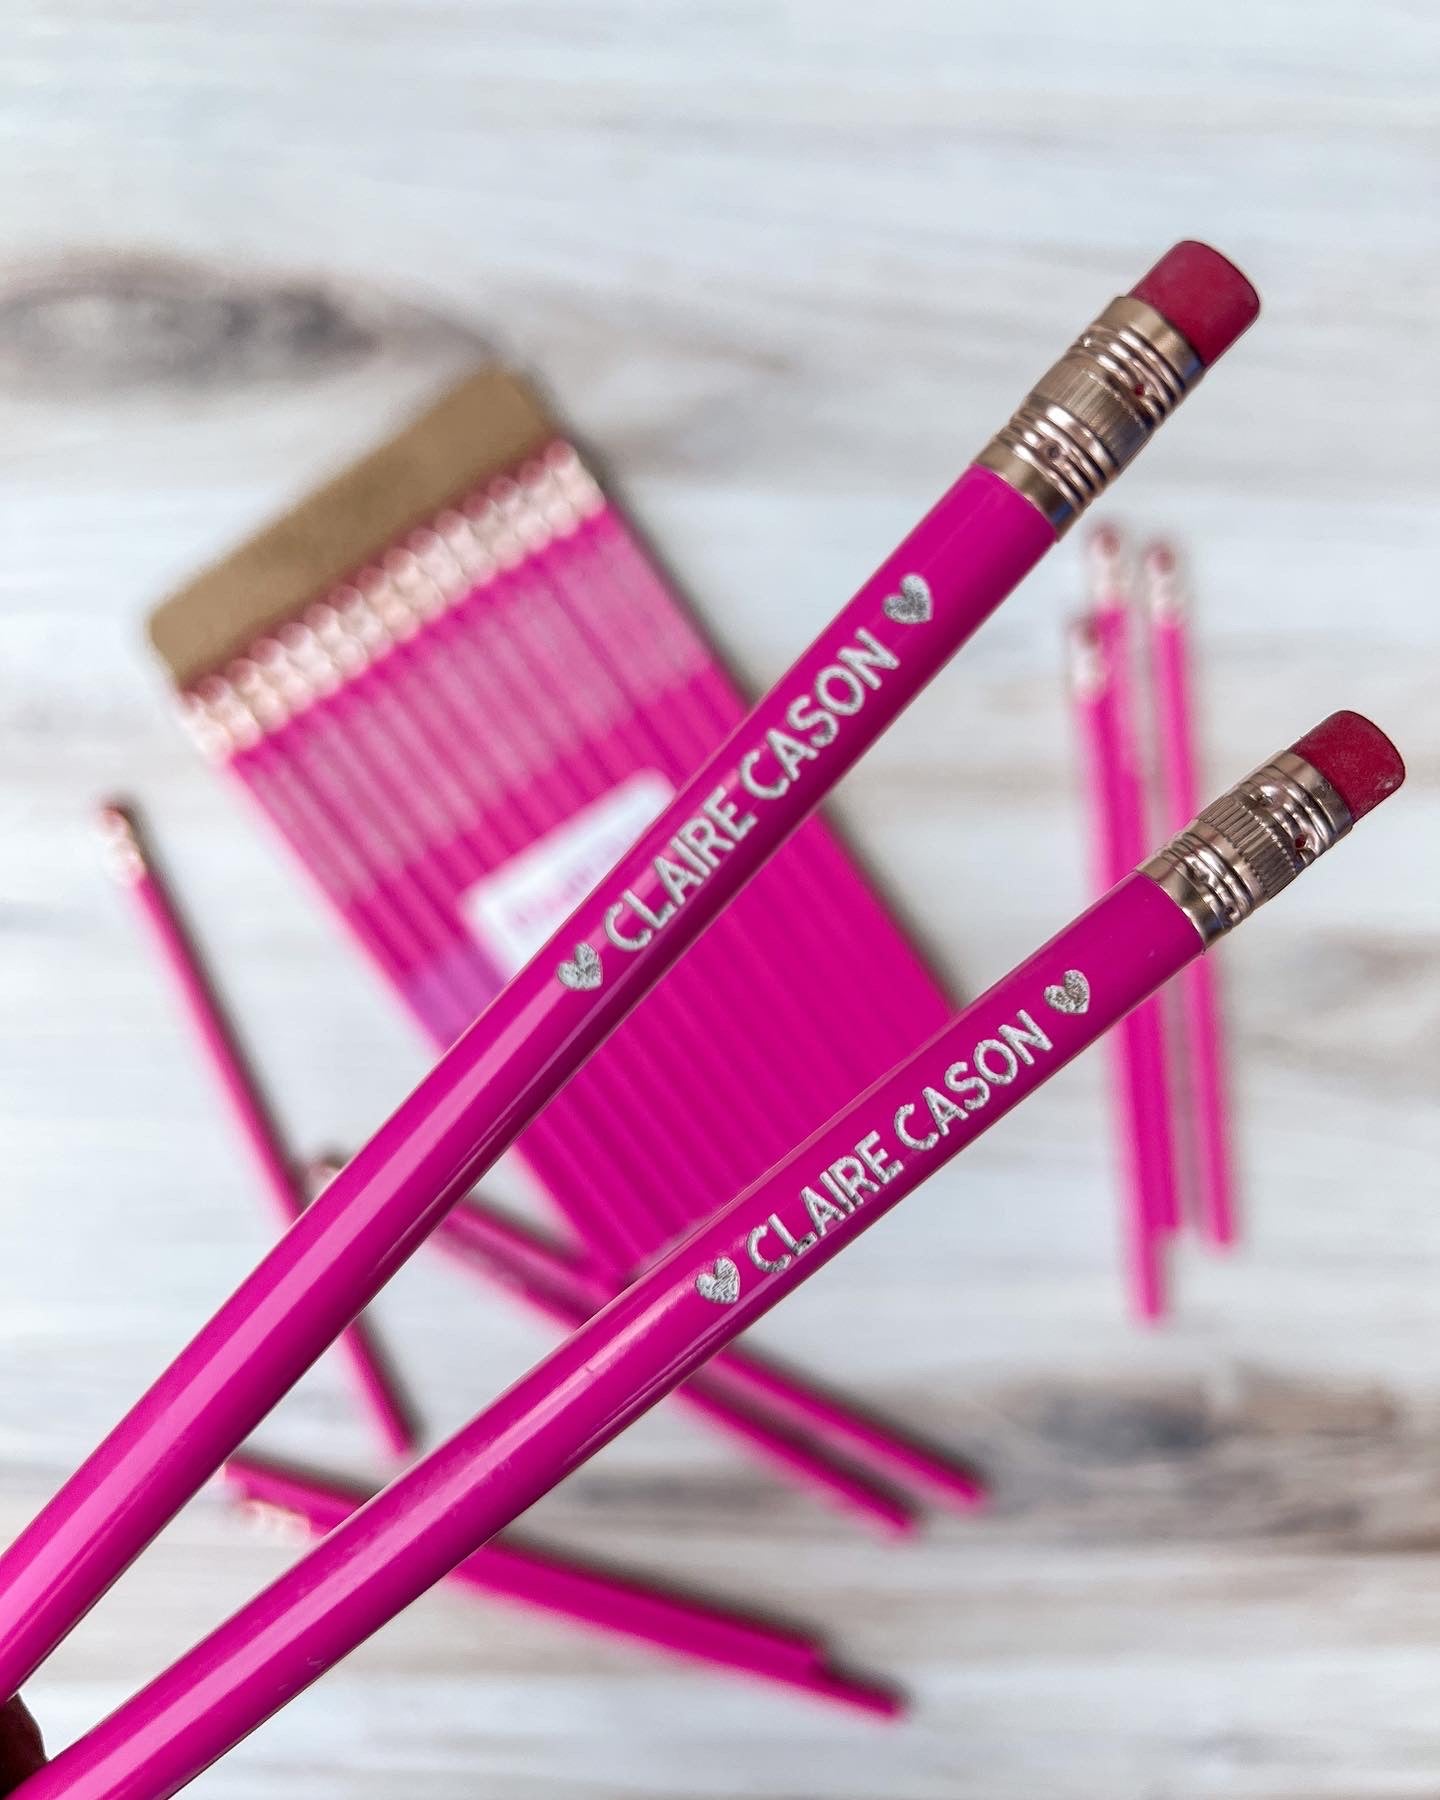 Personalized Pink Name Pencil Set (10 count)